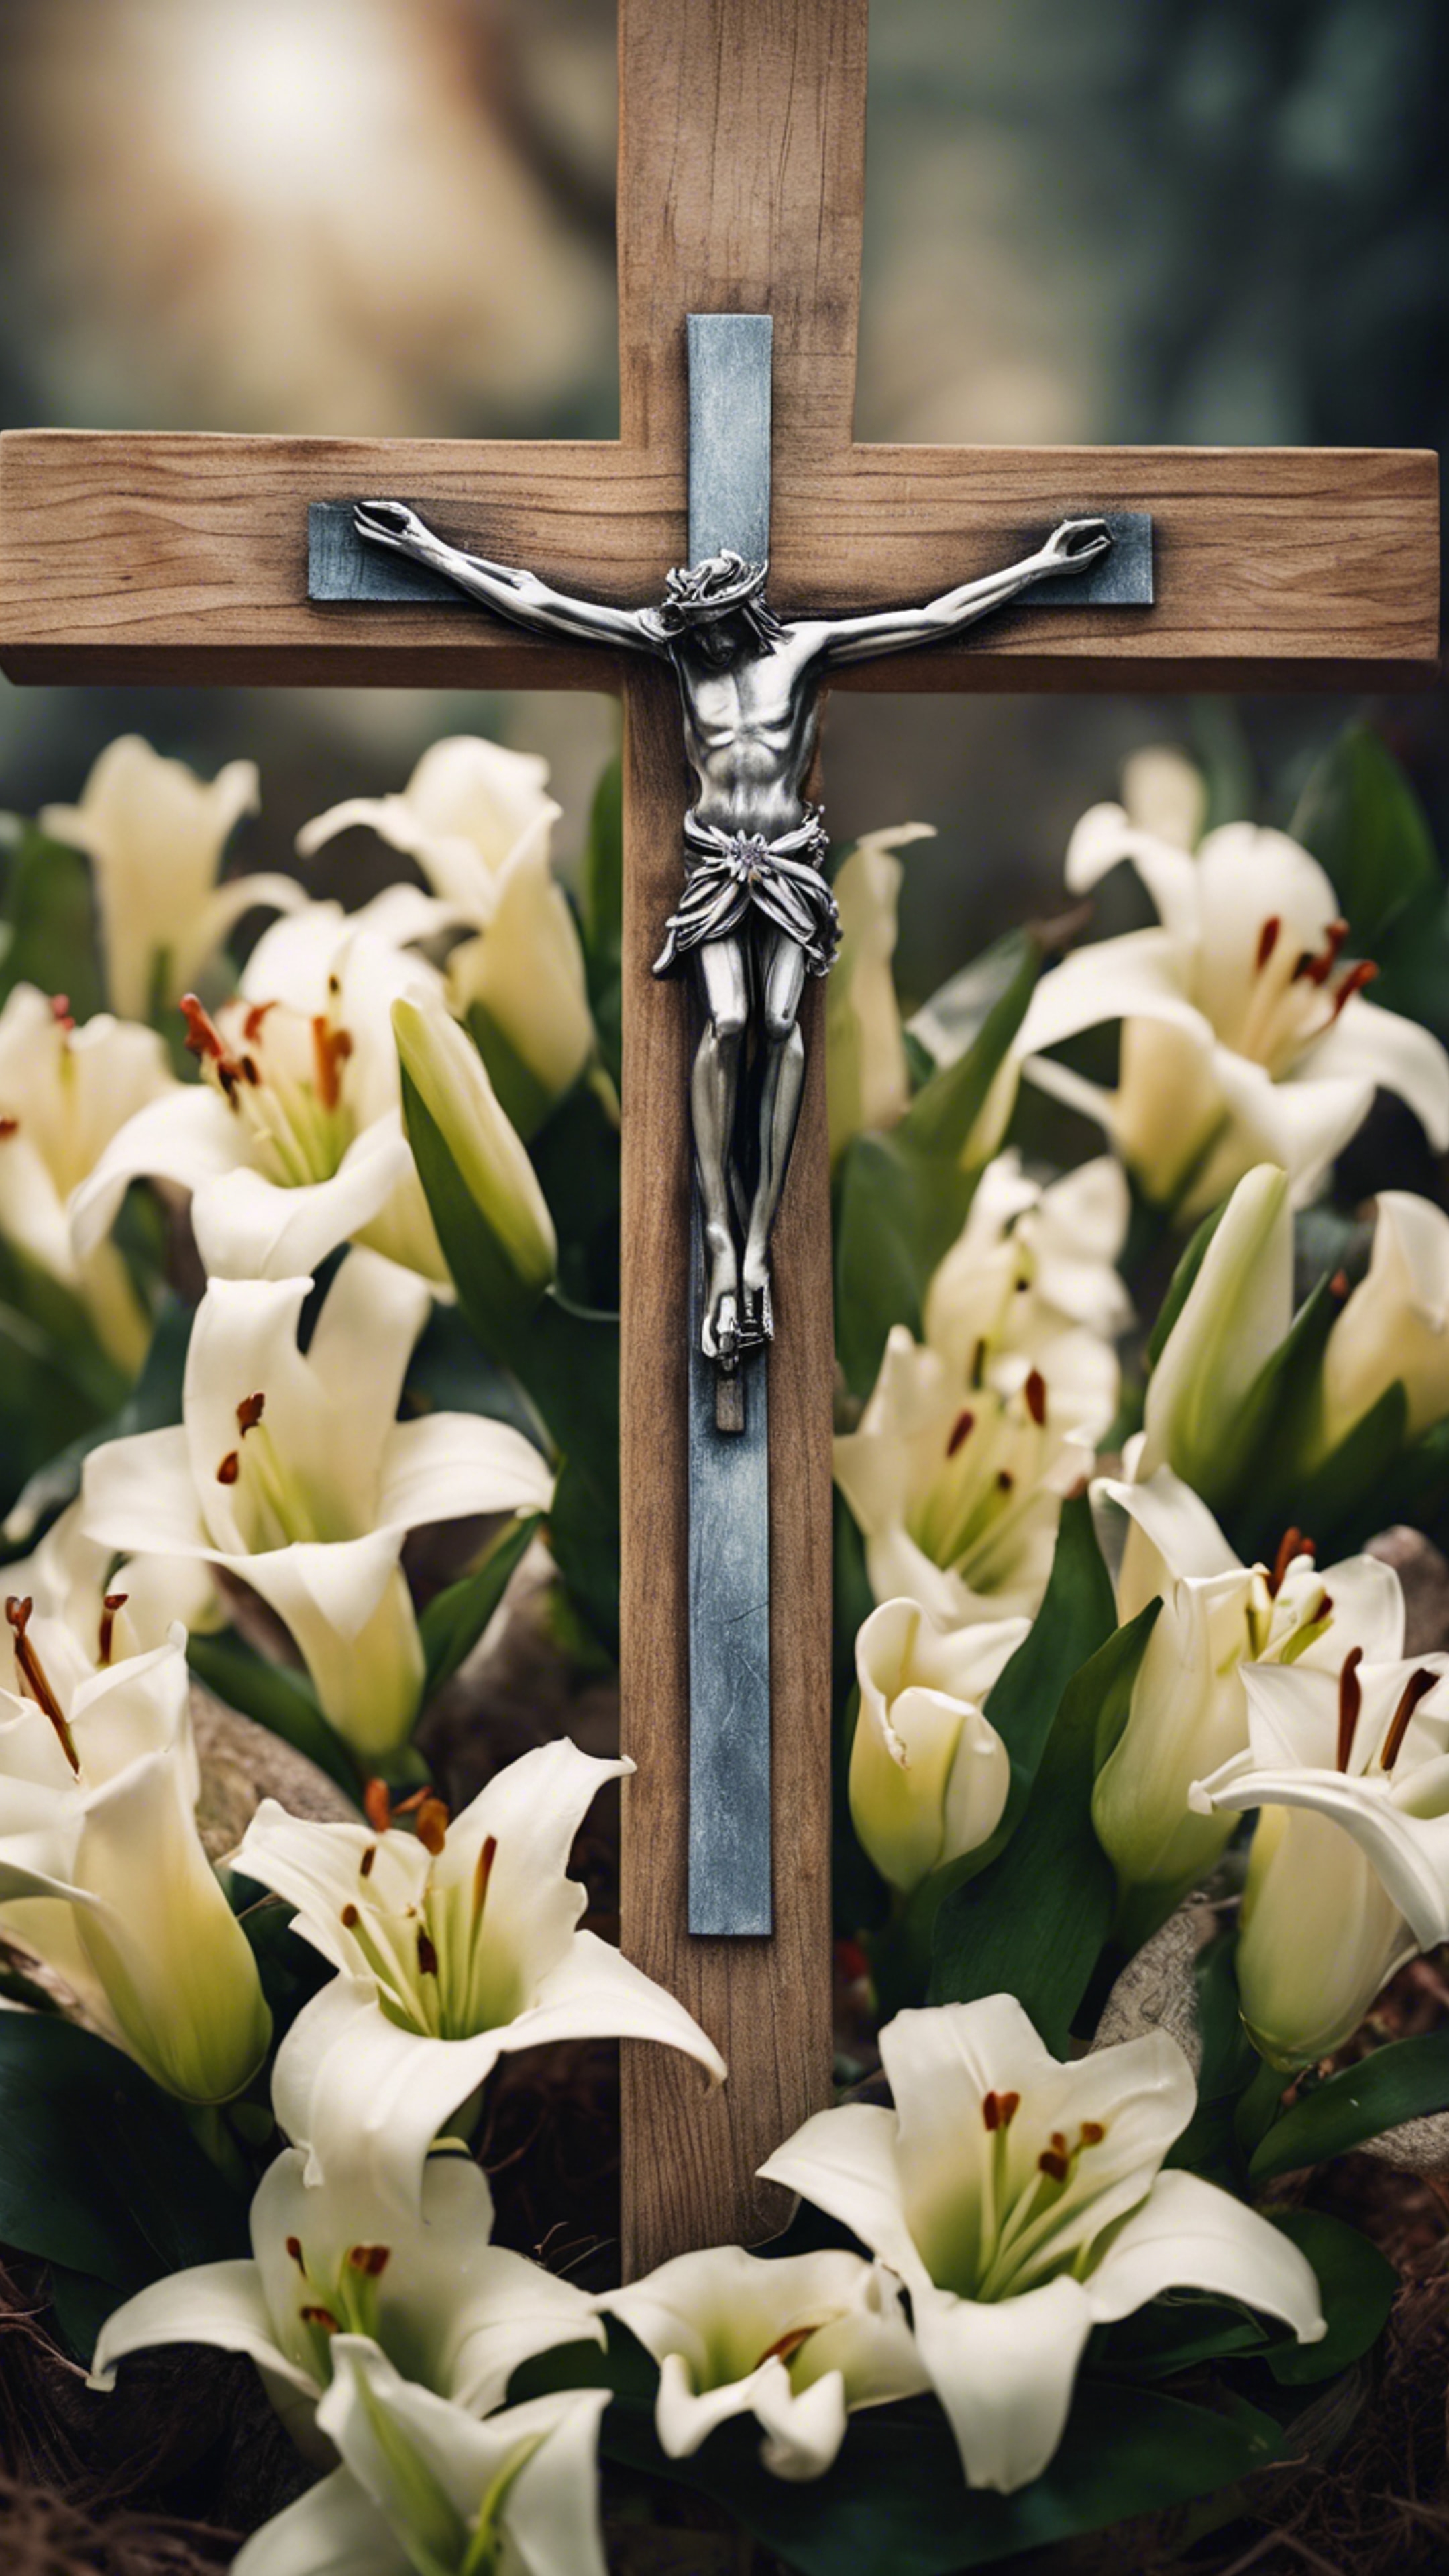 A simple wooden cross holding a crown of thorns, nestled amongst an array of blooming Easter lilies. Hintergrund[540a2c80d21742b6ad6b]